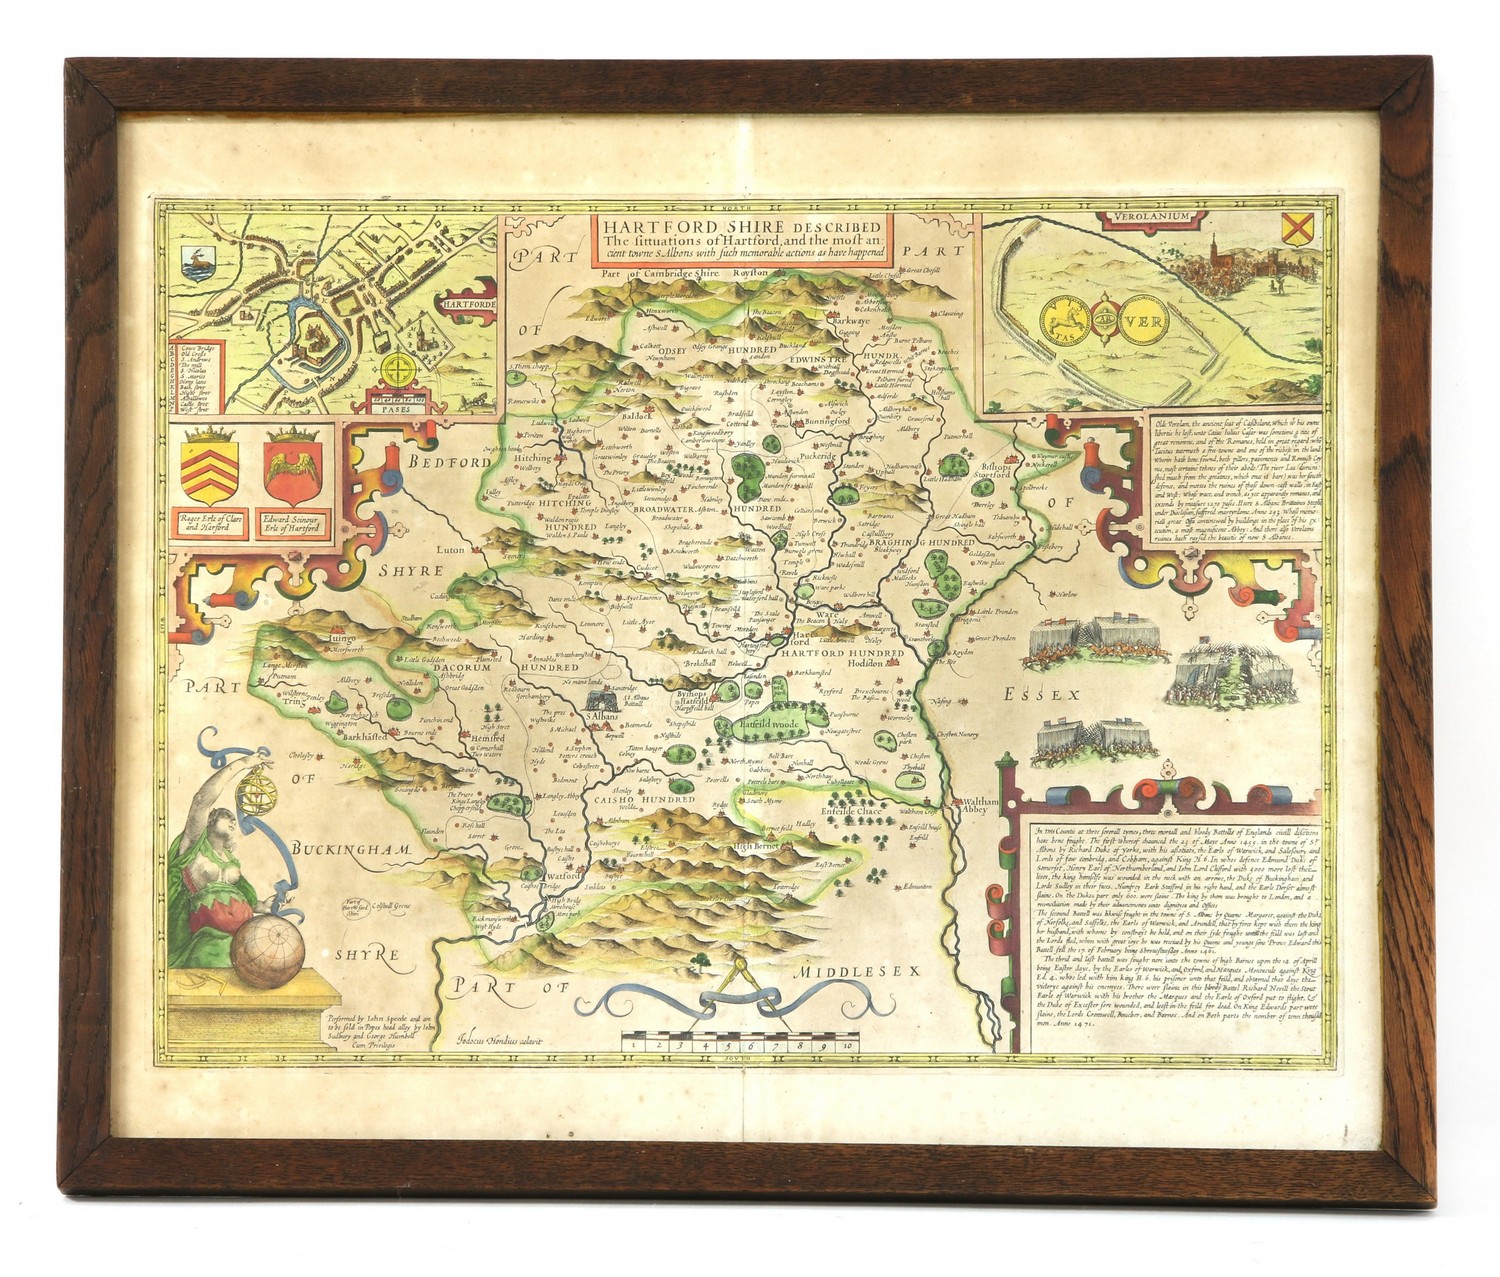 A John Speede hand coloured map of Hertfordshire